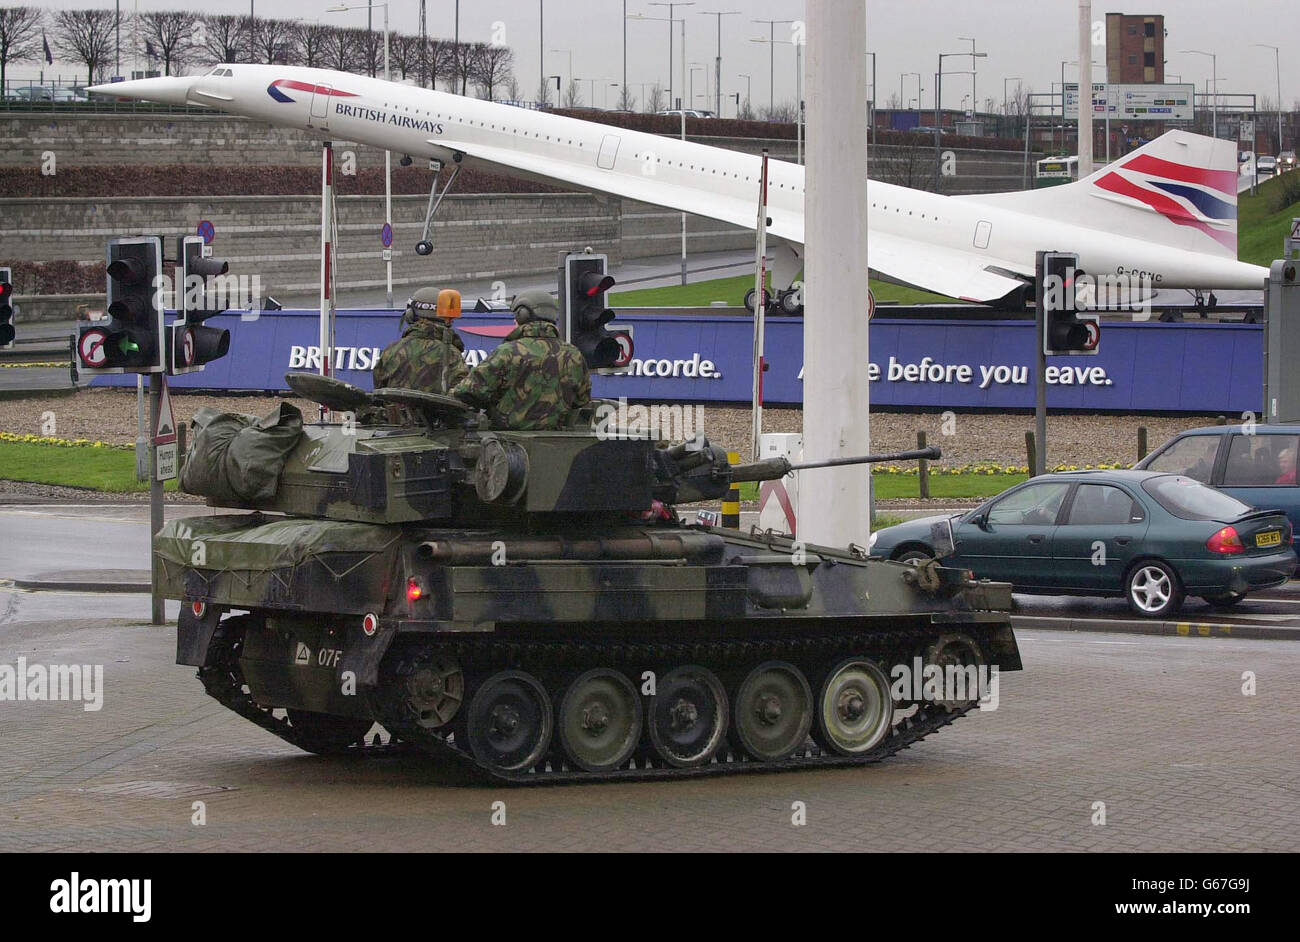 Soldiers in an armoured car stand guard in front of a model of a BritIsh Airways Concorde near the entrance to London's Heathrow airport. * Scotland Yard said that the troops had been moved in to support the Metropolitan Police as they stepped up security at the airport and other locations. 12/8/03: The United States has sent aviation experts to Iraq and major capitals in Europe and Asia to assess the security of commercial airports. The investigators are determining whether the airports can be defended against shoulder-fired missiles. The US Homeland Security Department is also asking Stock Photo